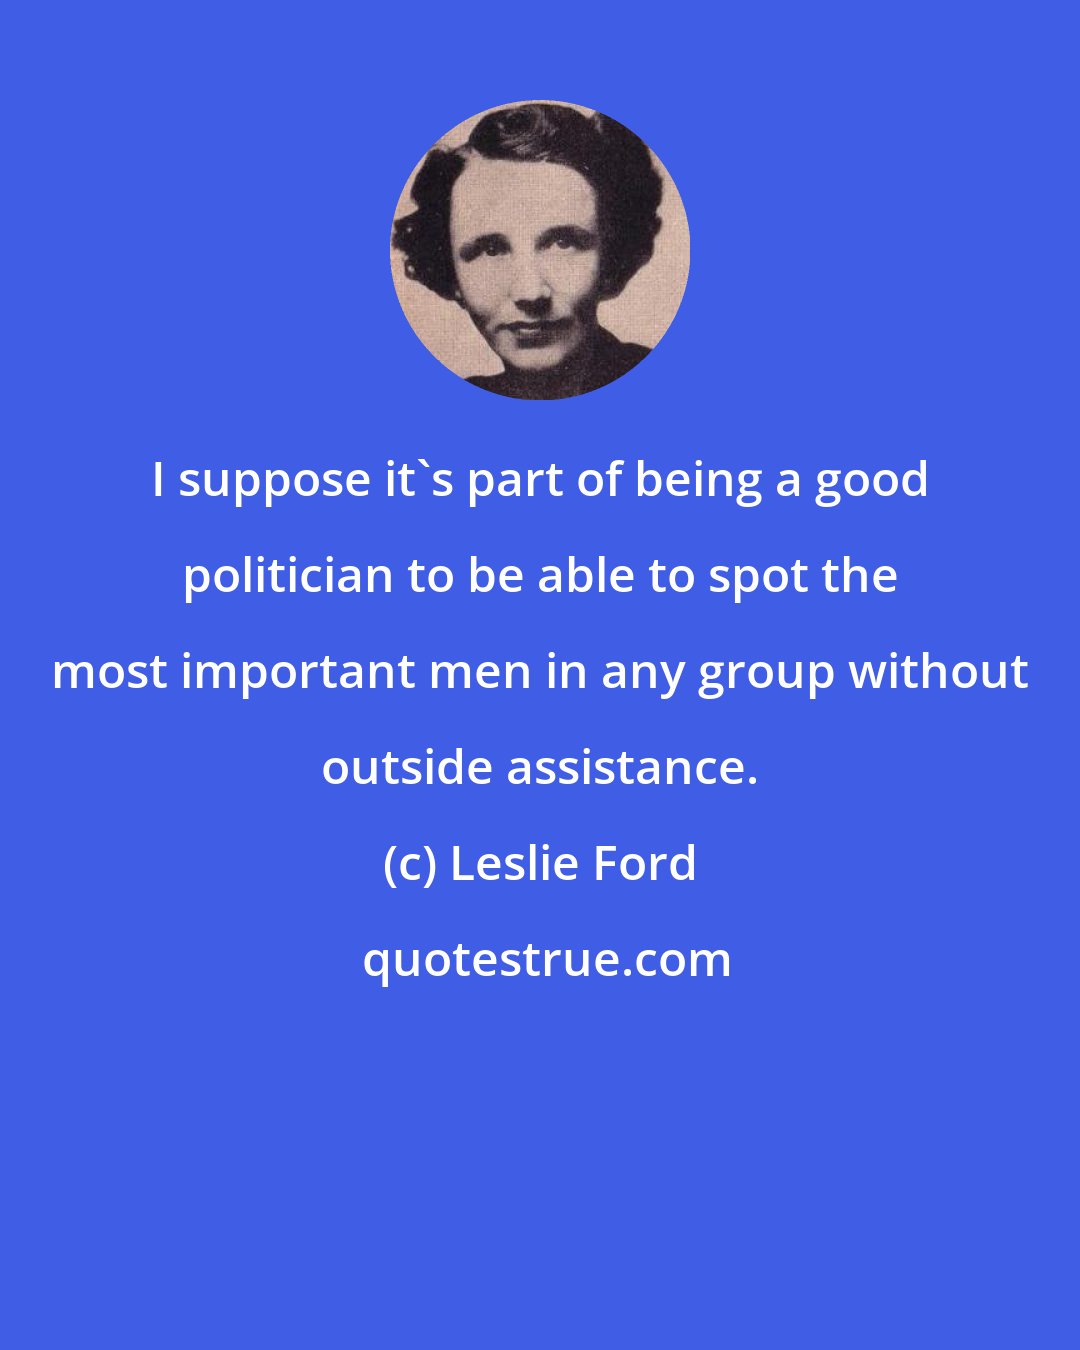 Leslie Ford: I suppose it's part of being a good politician to be able to spot the most important men in any group without outside assistance.